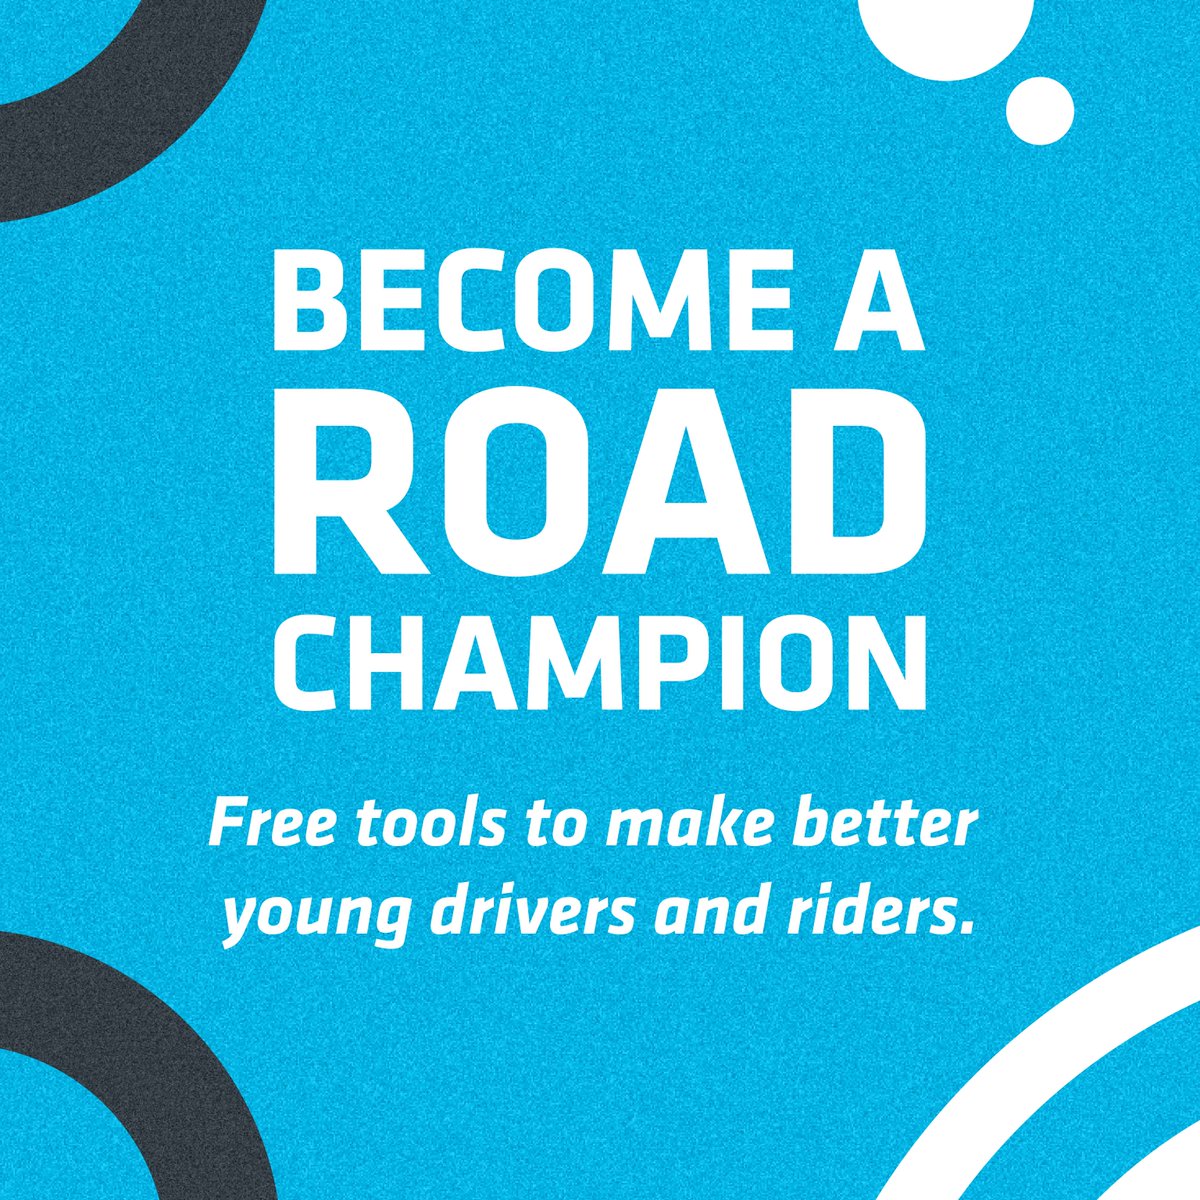 Our Road Champions will have the opportunity to level up their driving and riding game, by receiving expert insights and invaluable tips, at no cost whatsoever! ➡️ iamroadsmart.net/3xGZUqG Do you know someone aged 17-26 who you think should be a Road Champion? Tag them below! 👇🏼